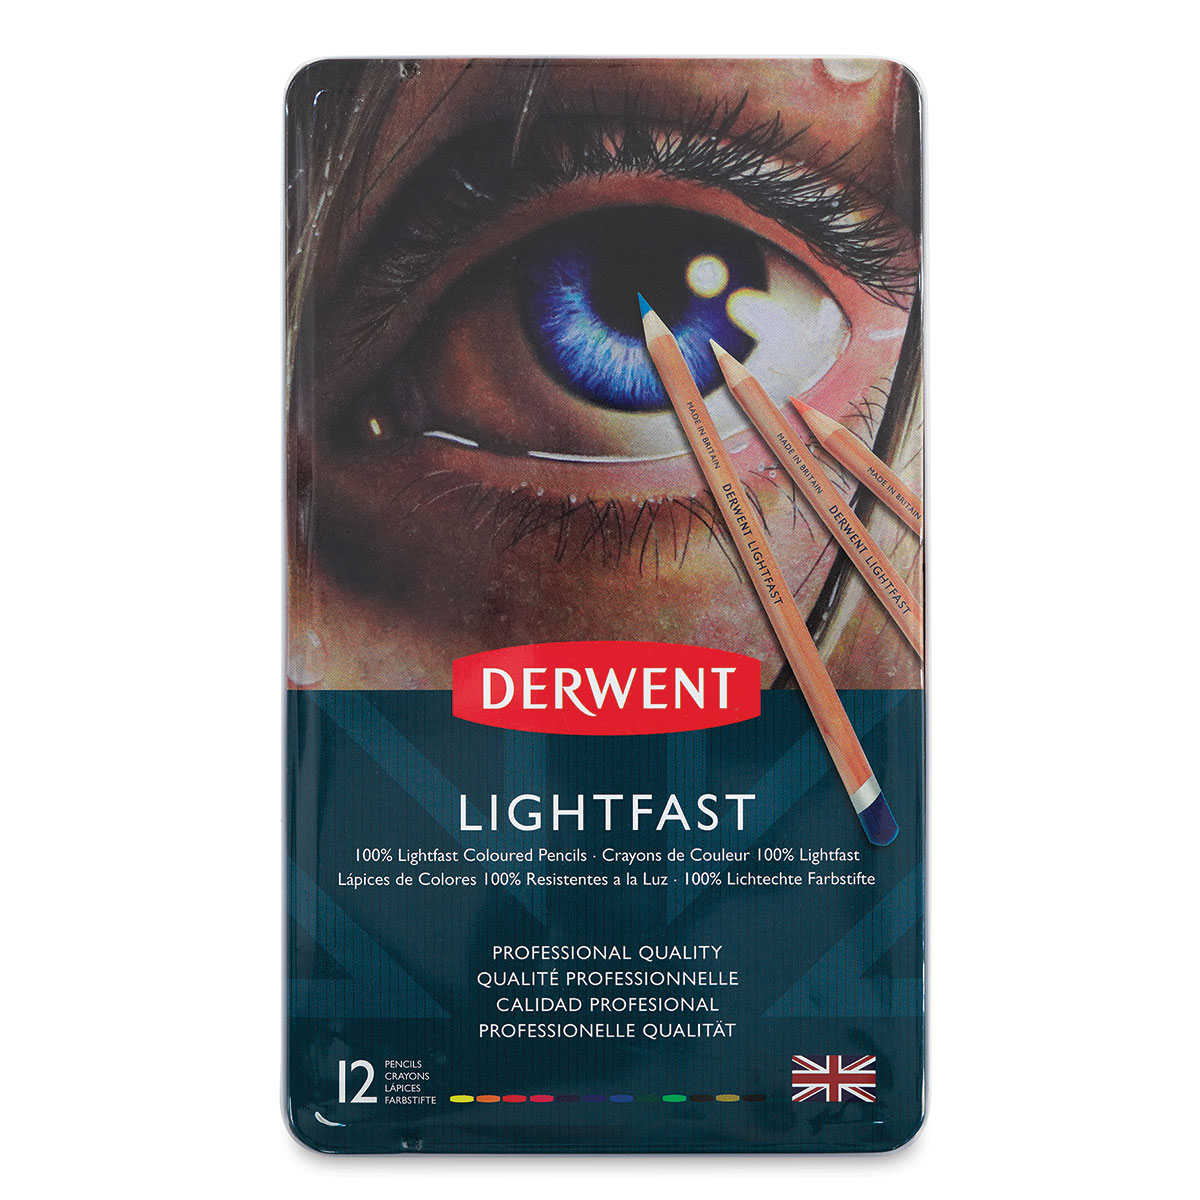 Derwent Lightfast Colored Pencils 12 Tin, Set of 12, 4mm Wide Core, 100%  Lightfast, Oil-based, Premium Core, Creamy, Ideal for Drawing, Coloring